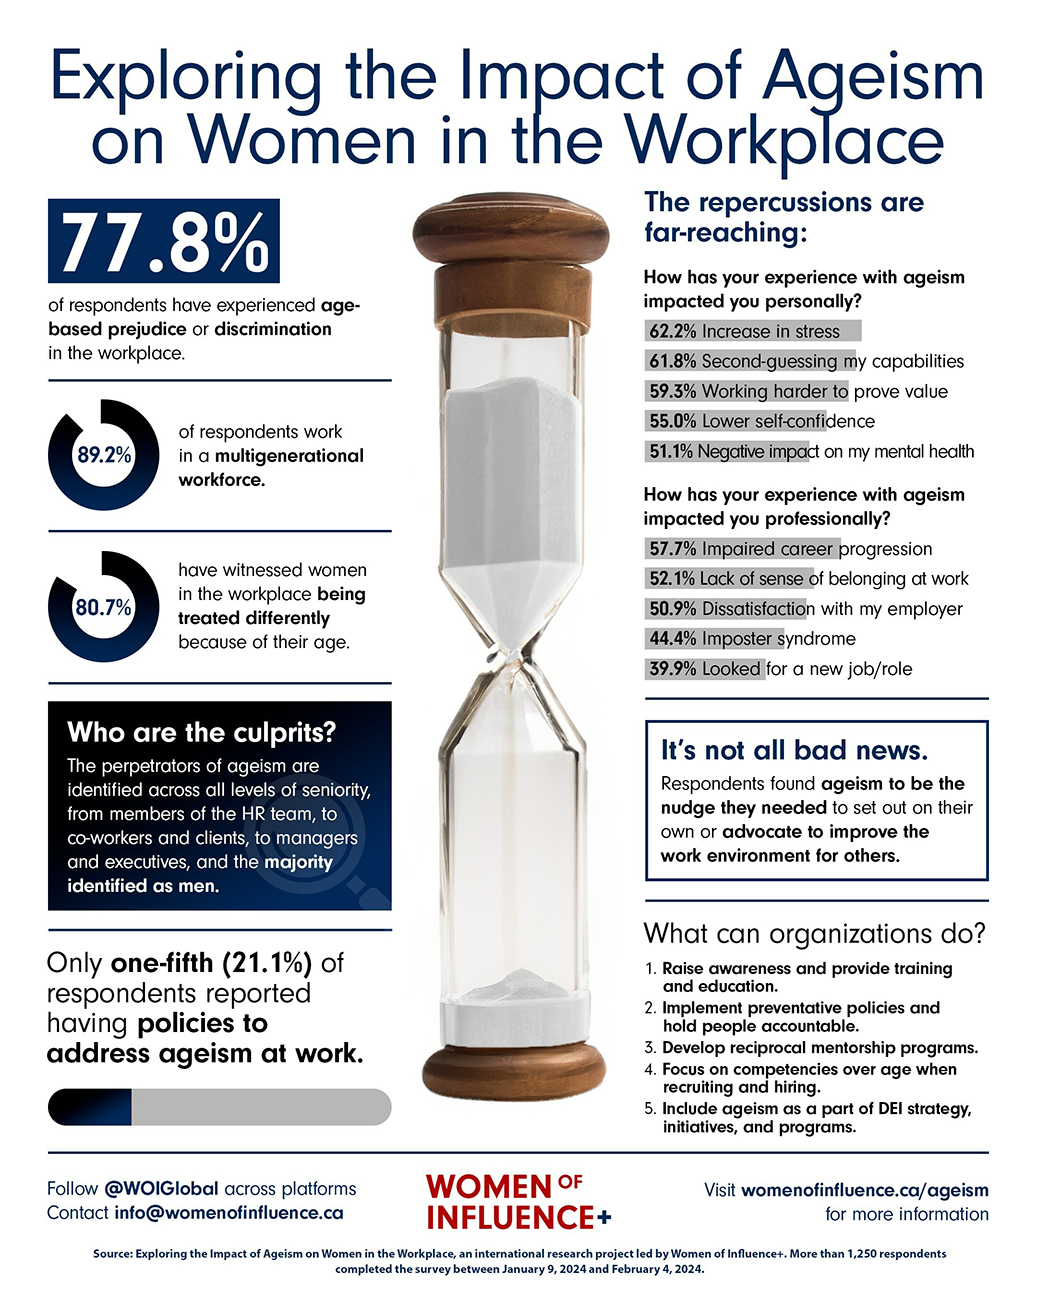 Women of Influence+, a leading global organization committed to advancing gender equity in the workplace, released its groundbreaking findings from its survey, 